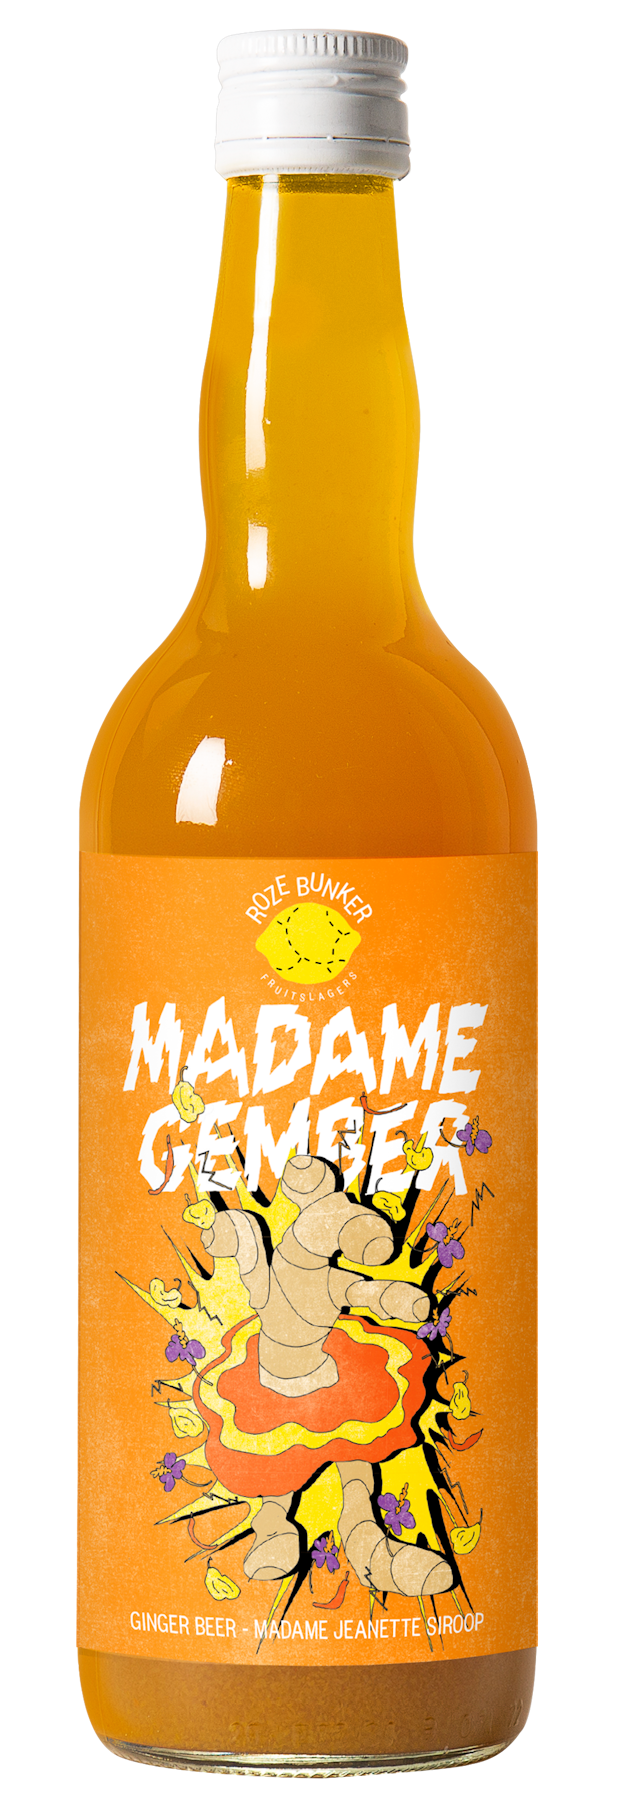 Bottle of Madame ginger syrup by Rozee Bunker